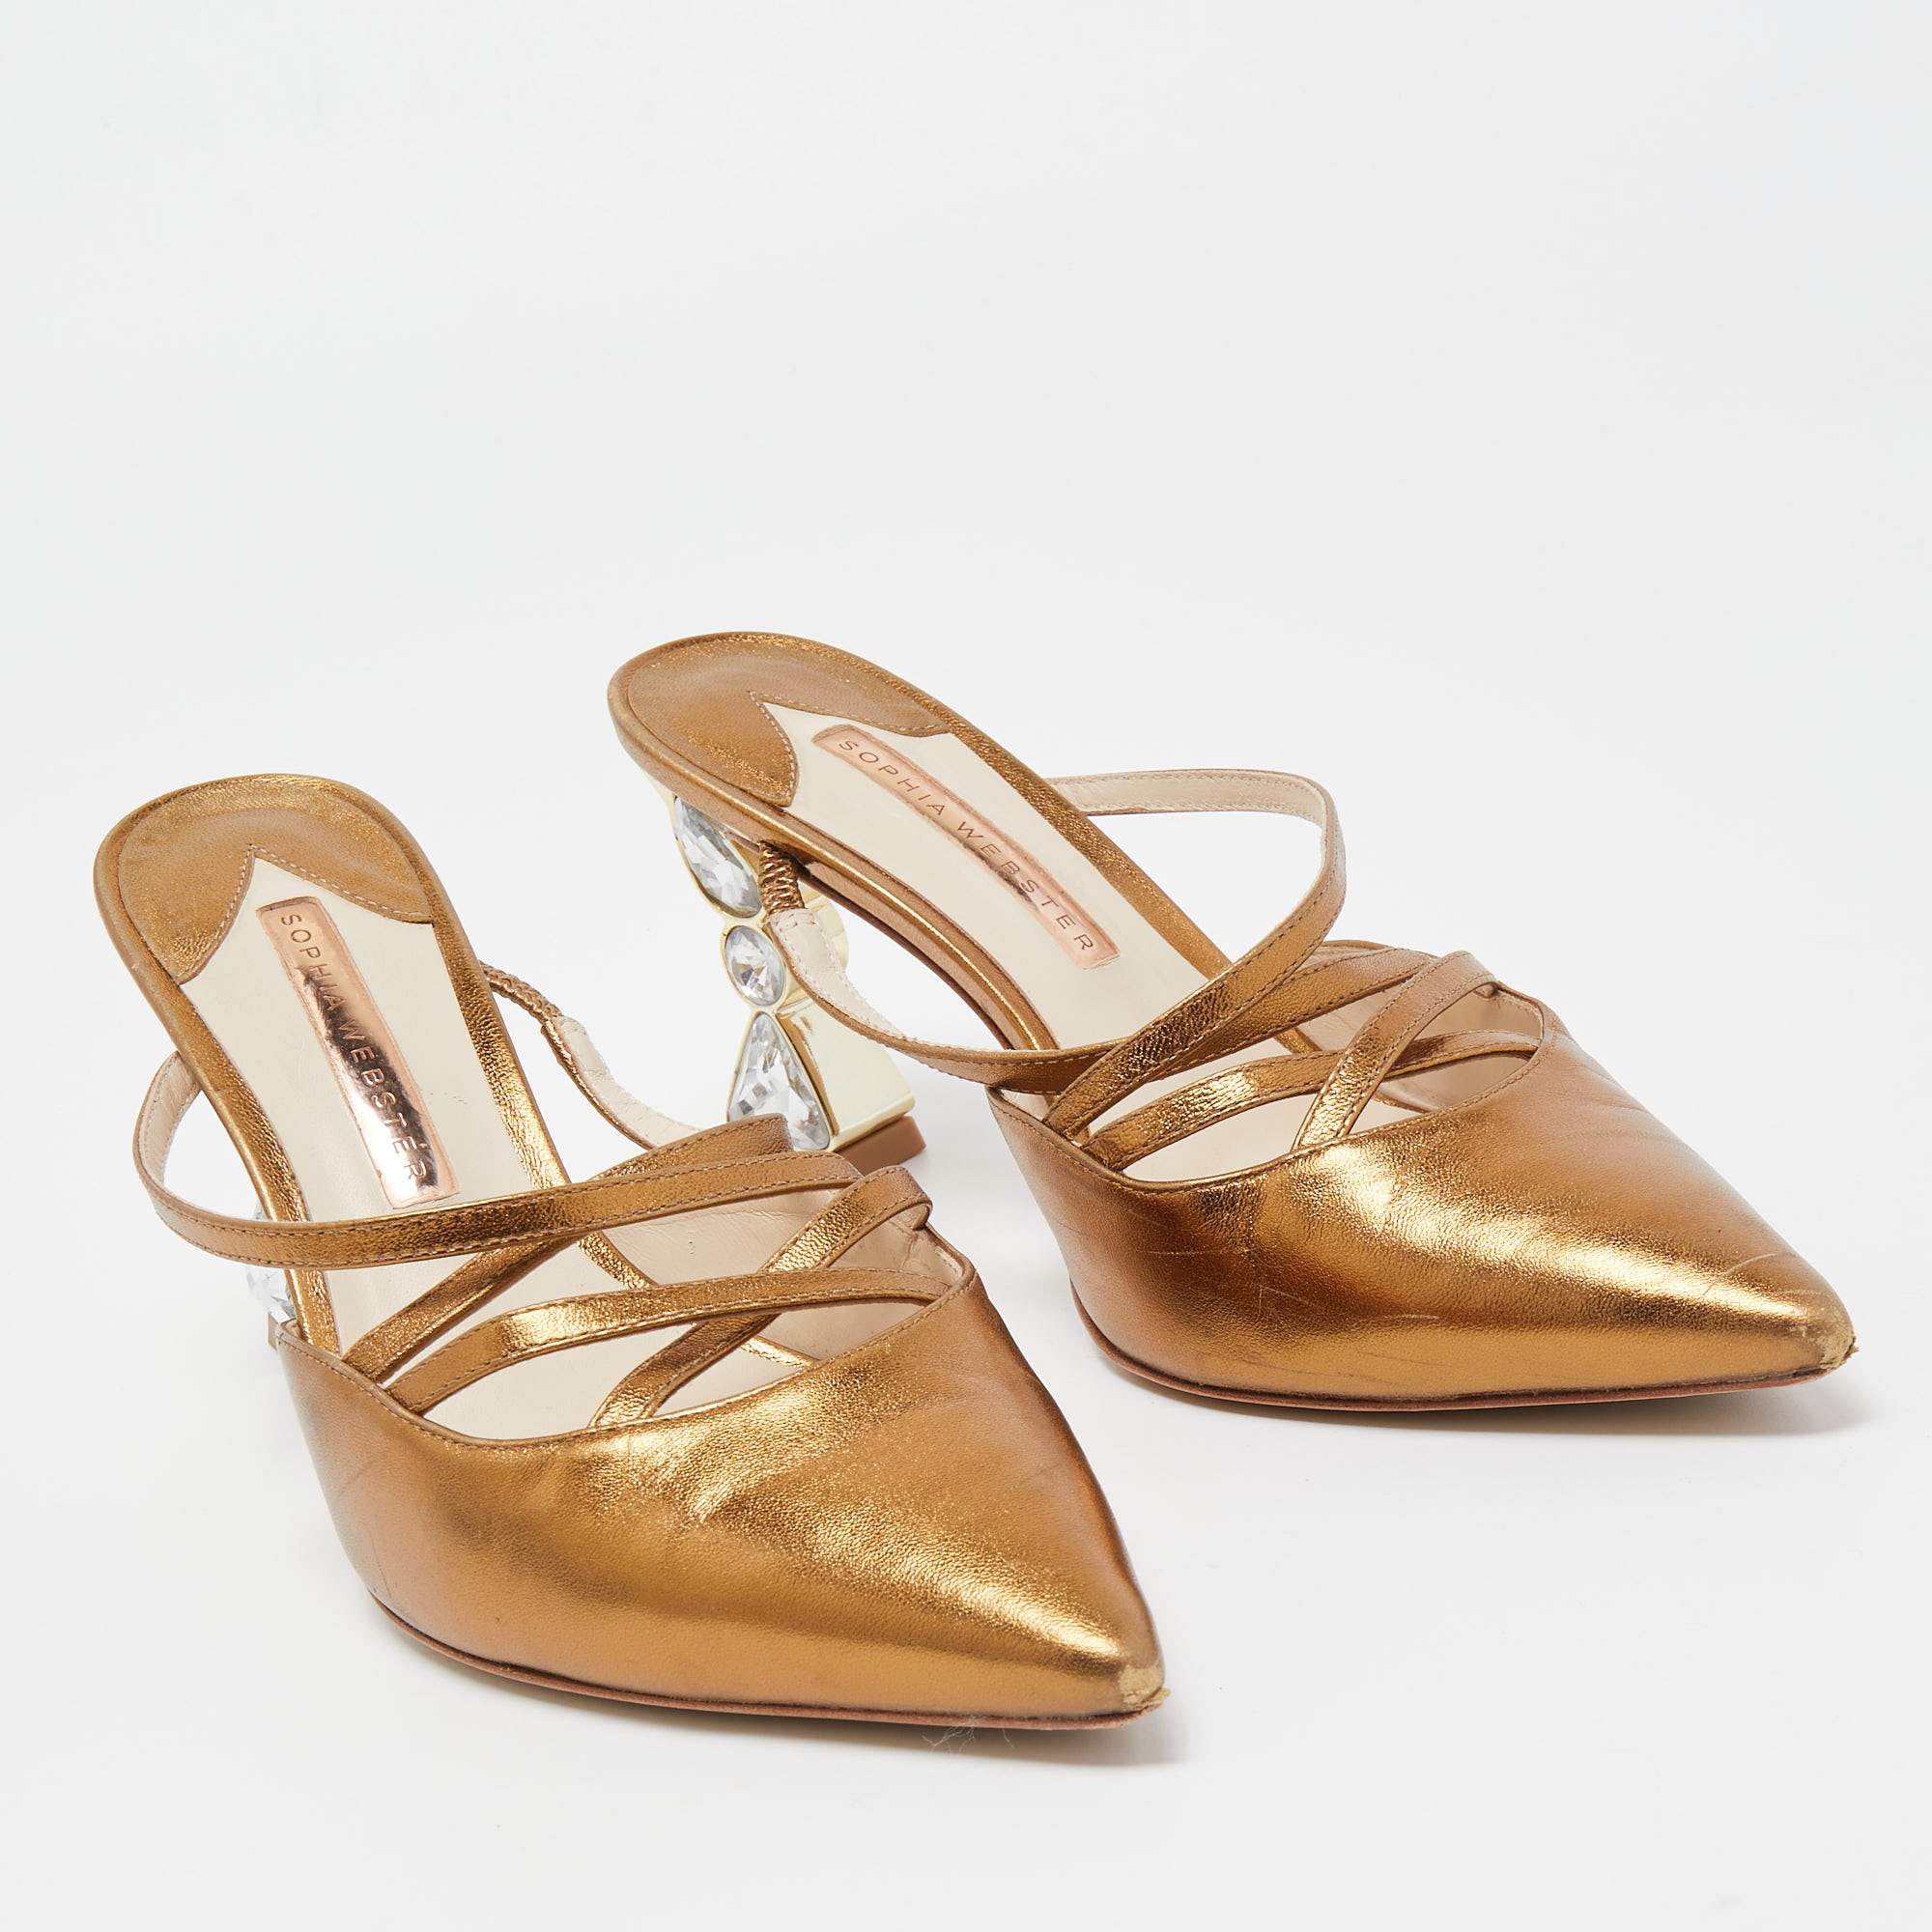 Sophia Webster Metallic Gold Leather Pointed Mules Size 38.5